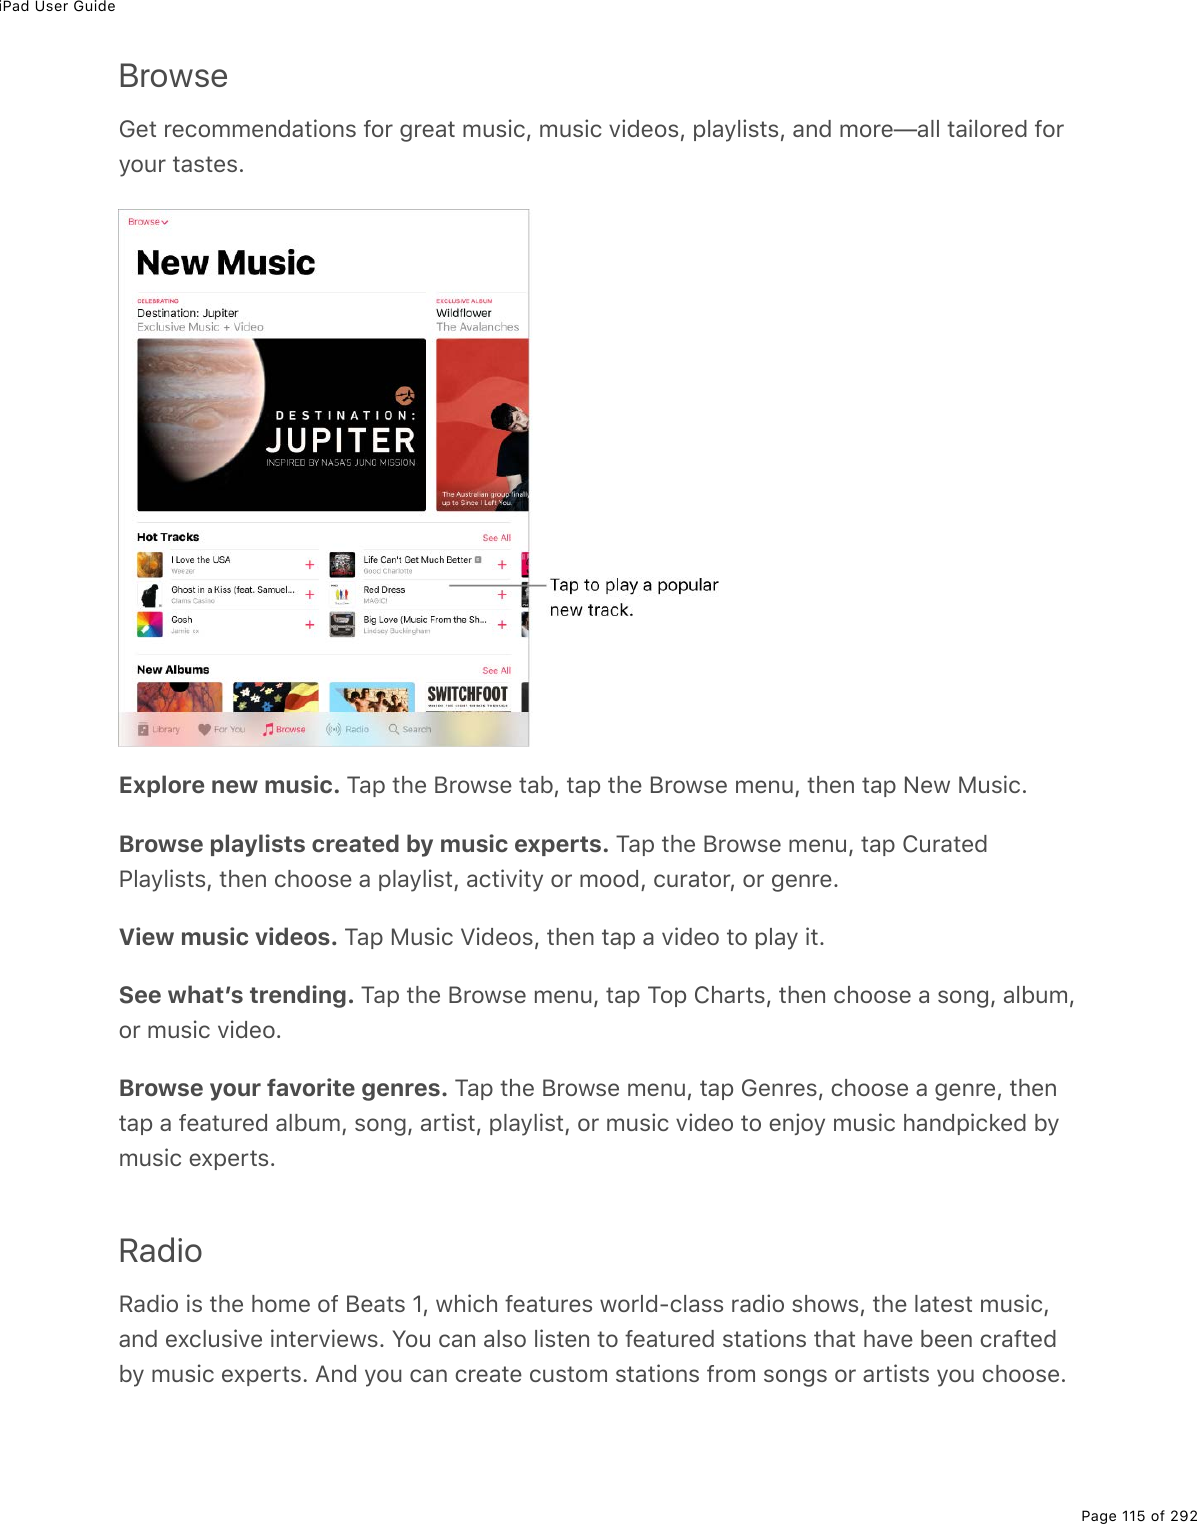 iPad User GuidePage 115 of 292BrowseGet recommendations for great music, music videos, playlists, and more—all tailored foryour tastes.Explore new music. Tap the Browse tab, tap the Browse menu, then tap New Music.Browse playlists created by music experts. Tap the Browse menu, tap CuratedPlaylists, then choose a playlist, activity or mood, curator, or genre.View music videos. Tap Music Videos, then tap a video to play it.See whatʼs trending. Tap the Browse menu, tap Top Charts, then choose a song, album,or music video.Browse your favorite genres. Tap the Browse menu, tap Genres, choose a genre, thentap a featured album, song, artist, playlist, or music video to enjoy music handpicked bymusic experts.RadioRadio is the home of Beats 1, which features world-class radio shows, the latest music,and exclusive interviews. You can also listen to featured stations that have been craftedby music experts. And you can create custom stations from songs or artists you choose.